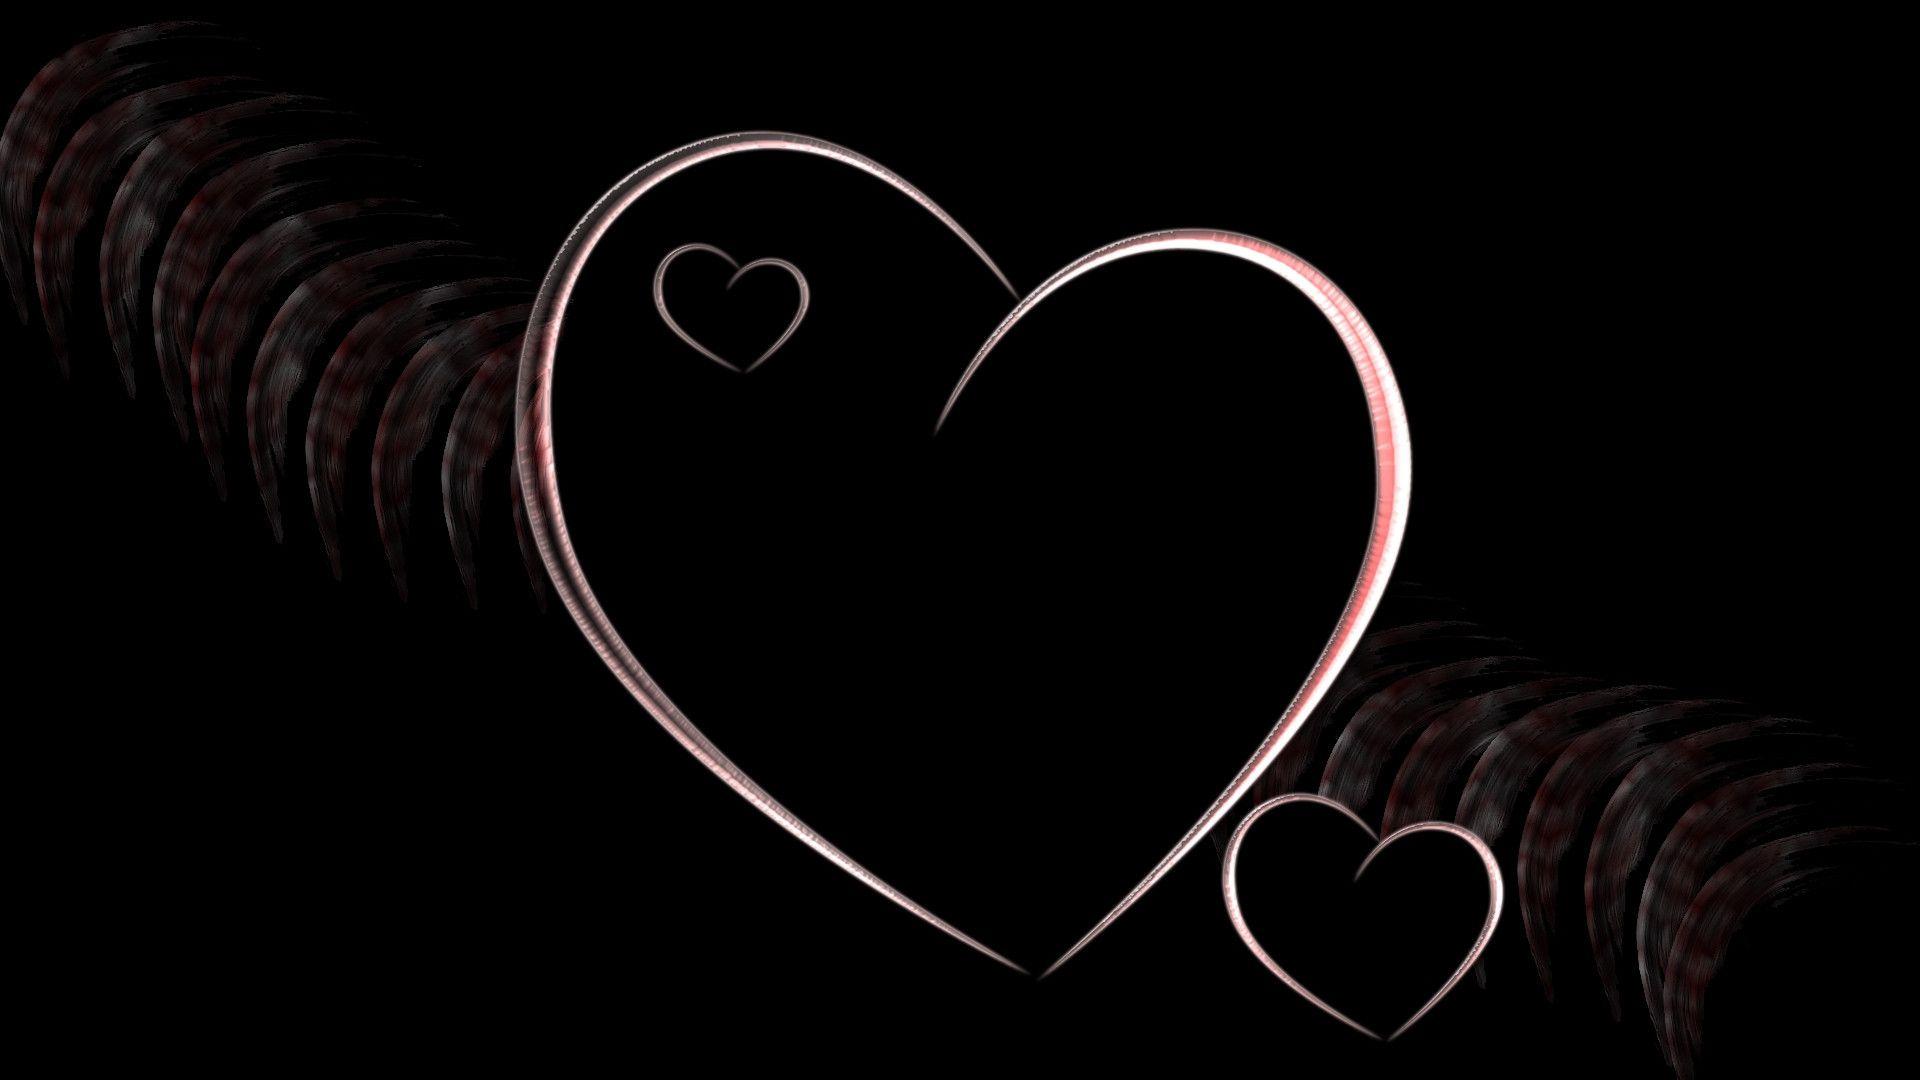 70+] Hearts With Black Background - WallpaperSafari